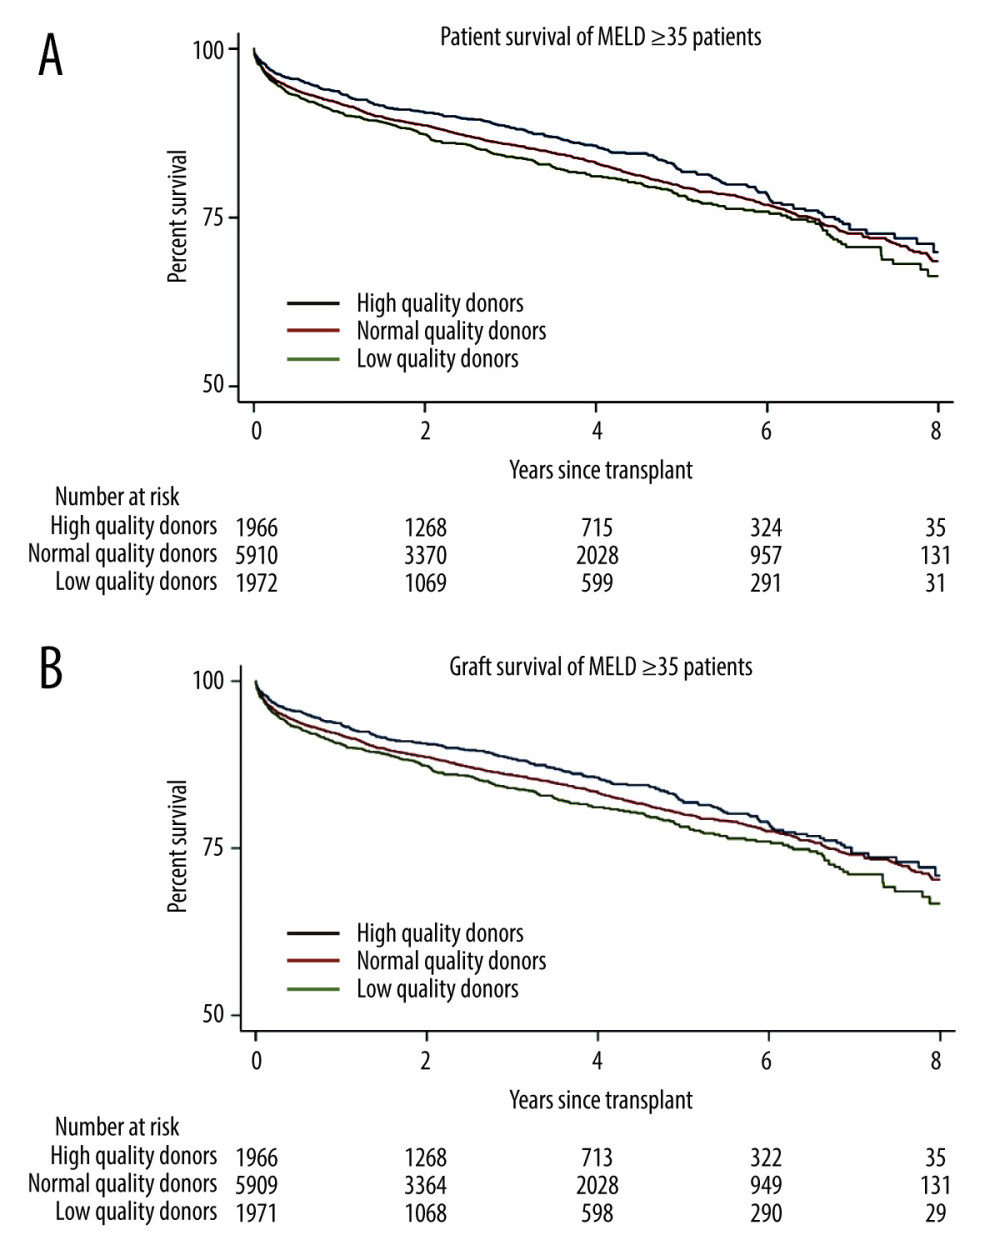 Kaplan-Meier curve for survival in patients with MELD scores ≥35. (A) Patient survival shows significant difference for high- and normal-quality donors, compared with low-quality donors (log-rank, P<0.001 and P=0.02, respectively. (B) Graft survival shows significant differences for high- and normal-quality donors, compared with low-quality donors (log-rank, P<0.001 and P<0.001, respectively). StataCorp. 2023. Stata Statistical Software: Release 18. College Station, TX: StataCorp LLC.